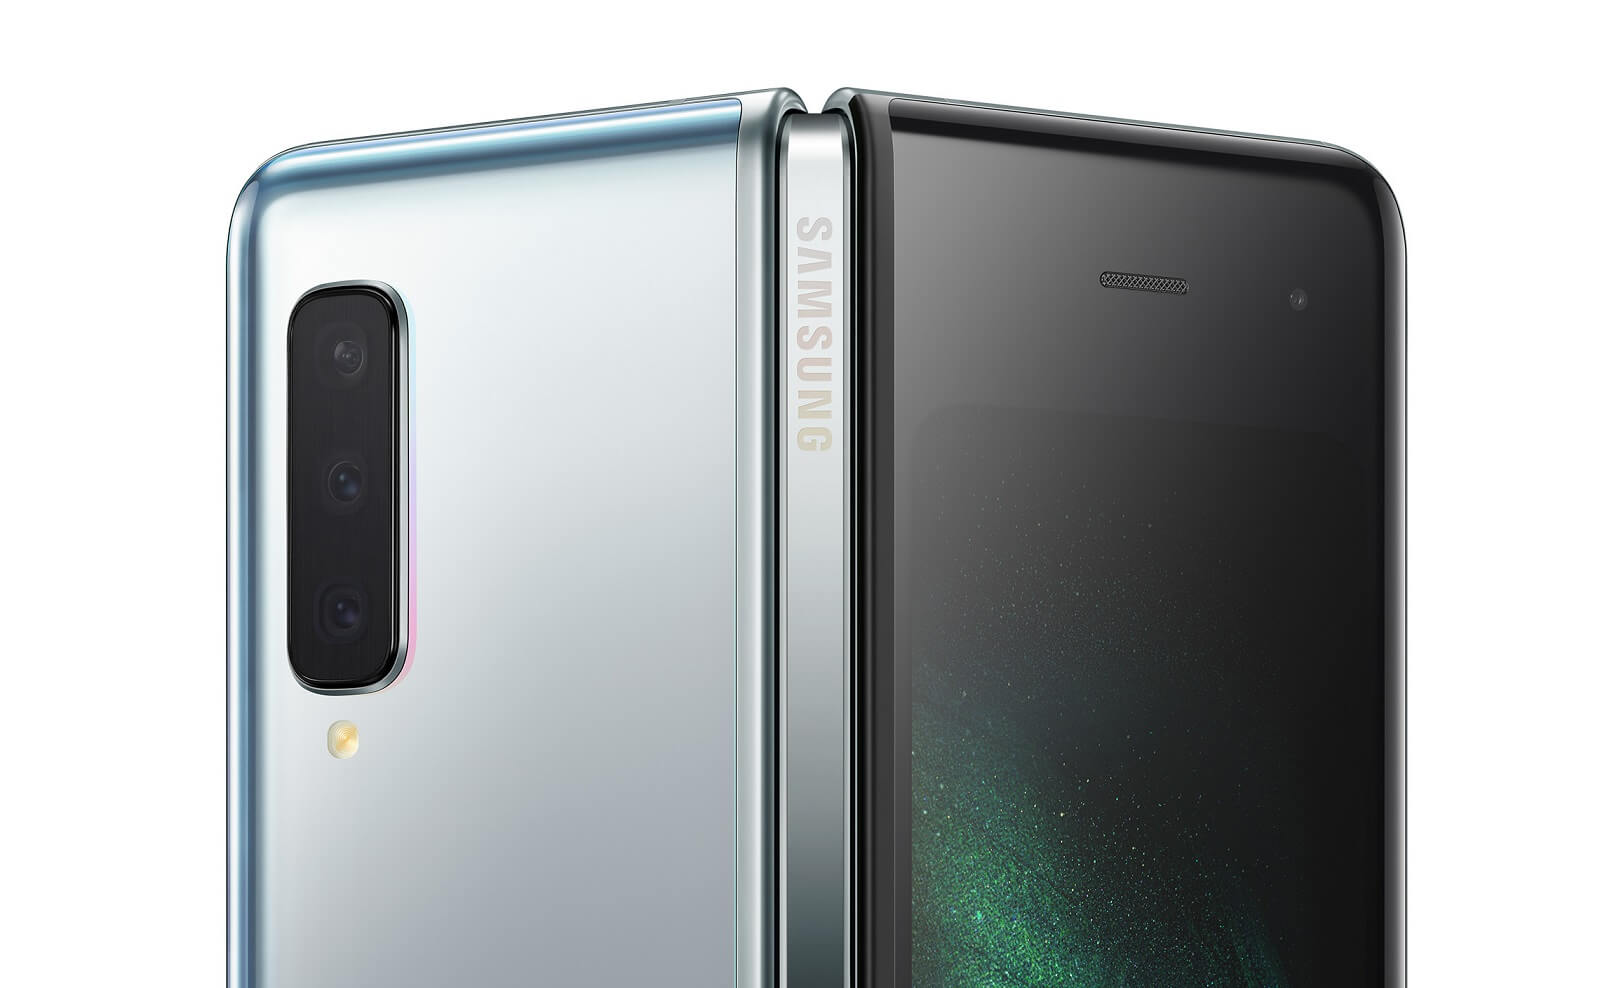 Samsung could announce the Galaxy Fold's launch at IFA next week